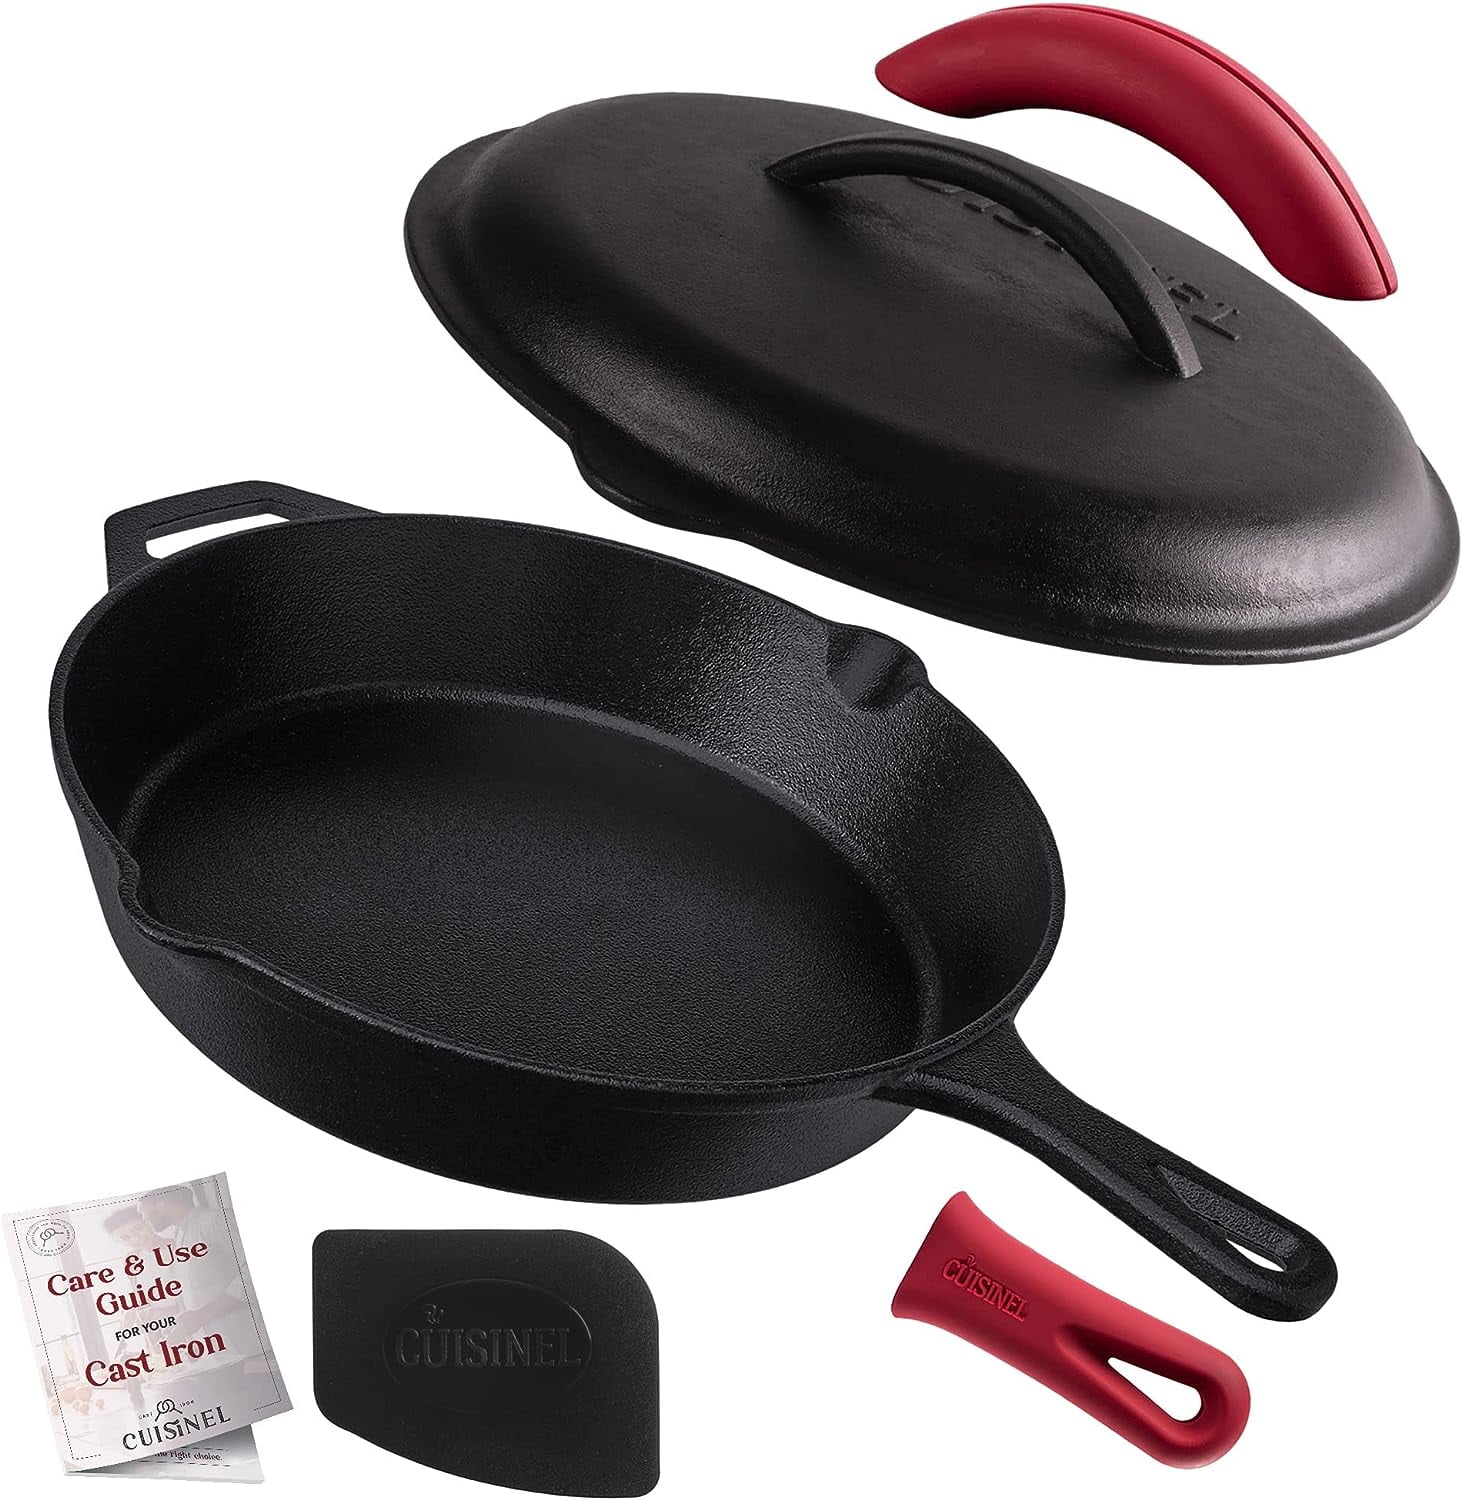 How to Clean a Cast Iron Skillet at Camp 